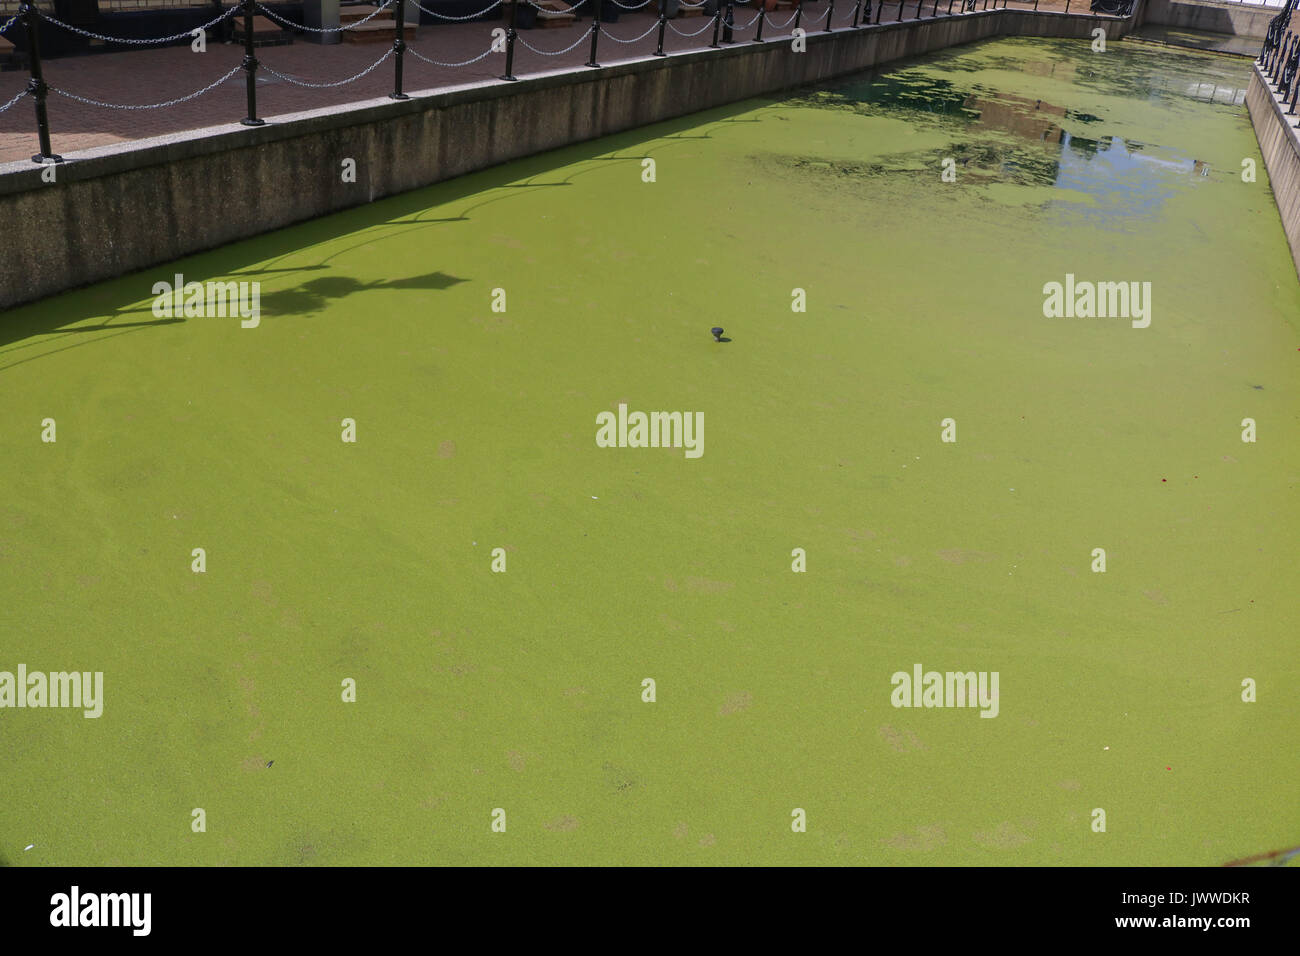 London, UK. 14th Aug, 2017. Residential houses overlooking a canal in Limehouse east London, UK. covered in growing green algae due to the recent hot weather conditions Credit: amer ghazzal/Alamy Live News Stock Photo